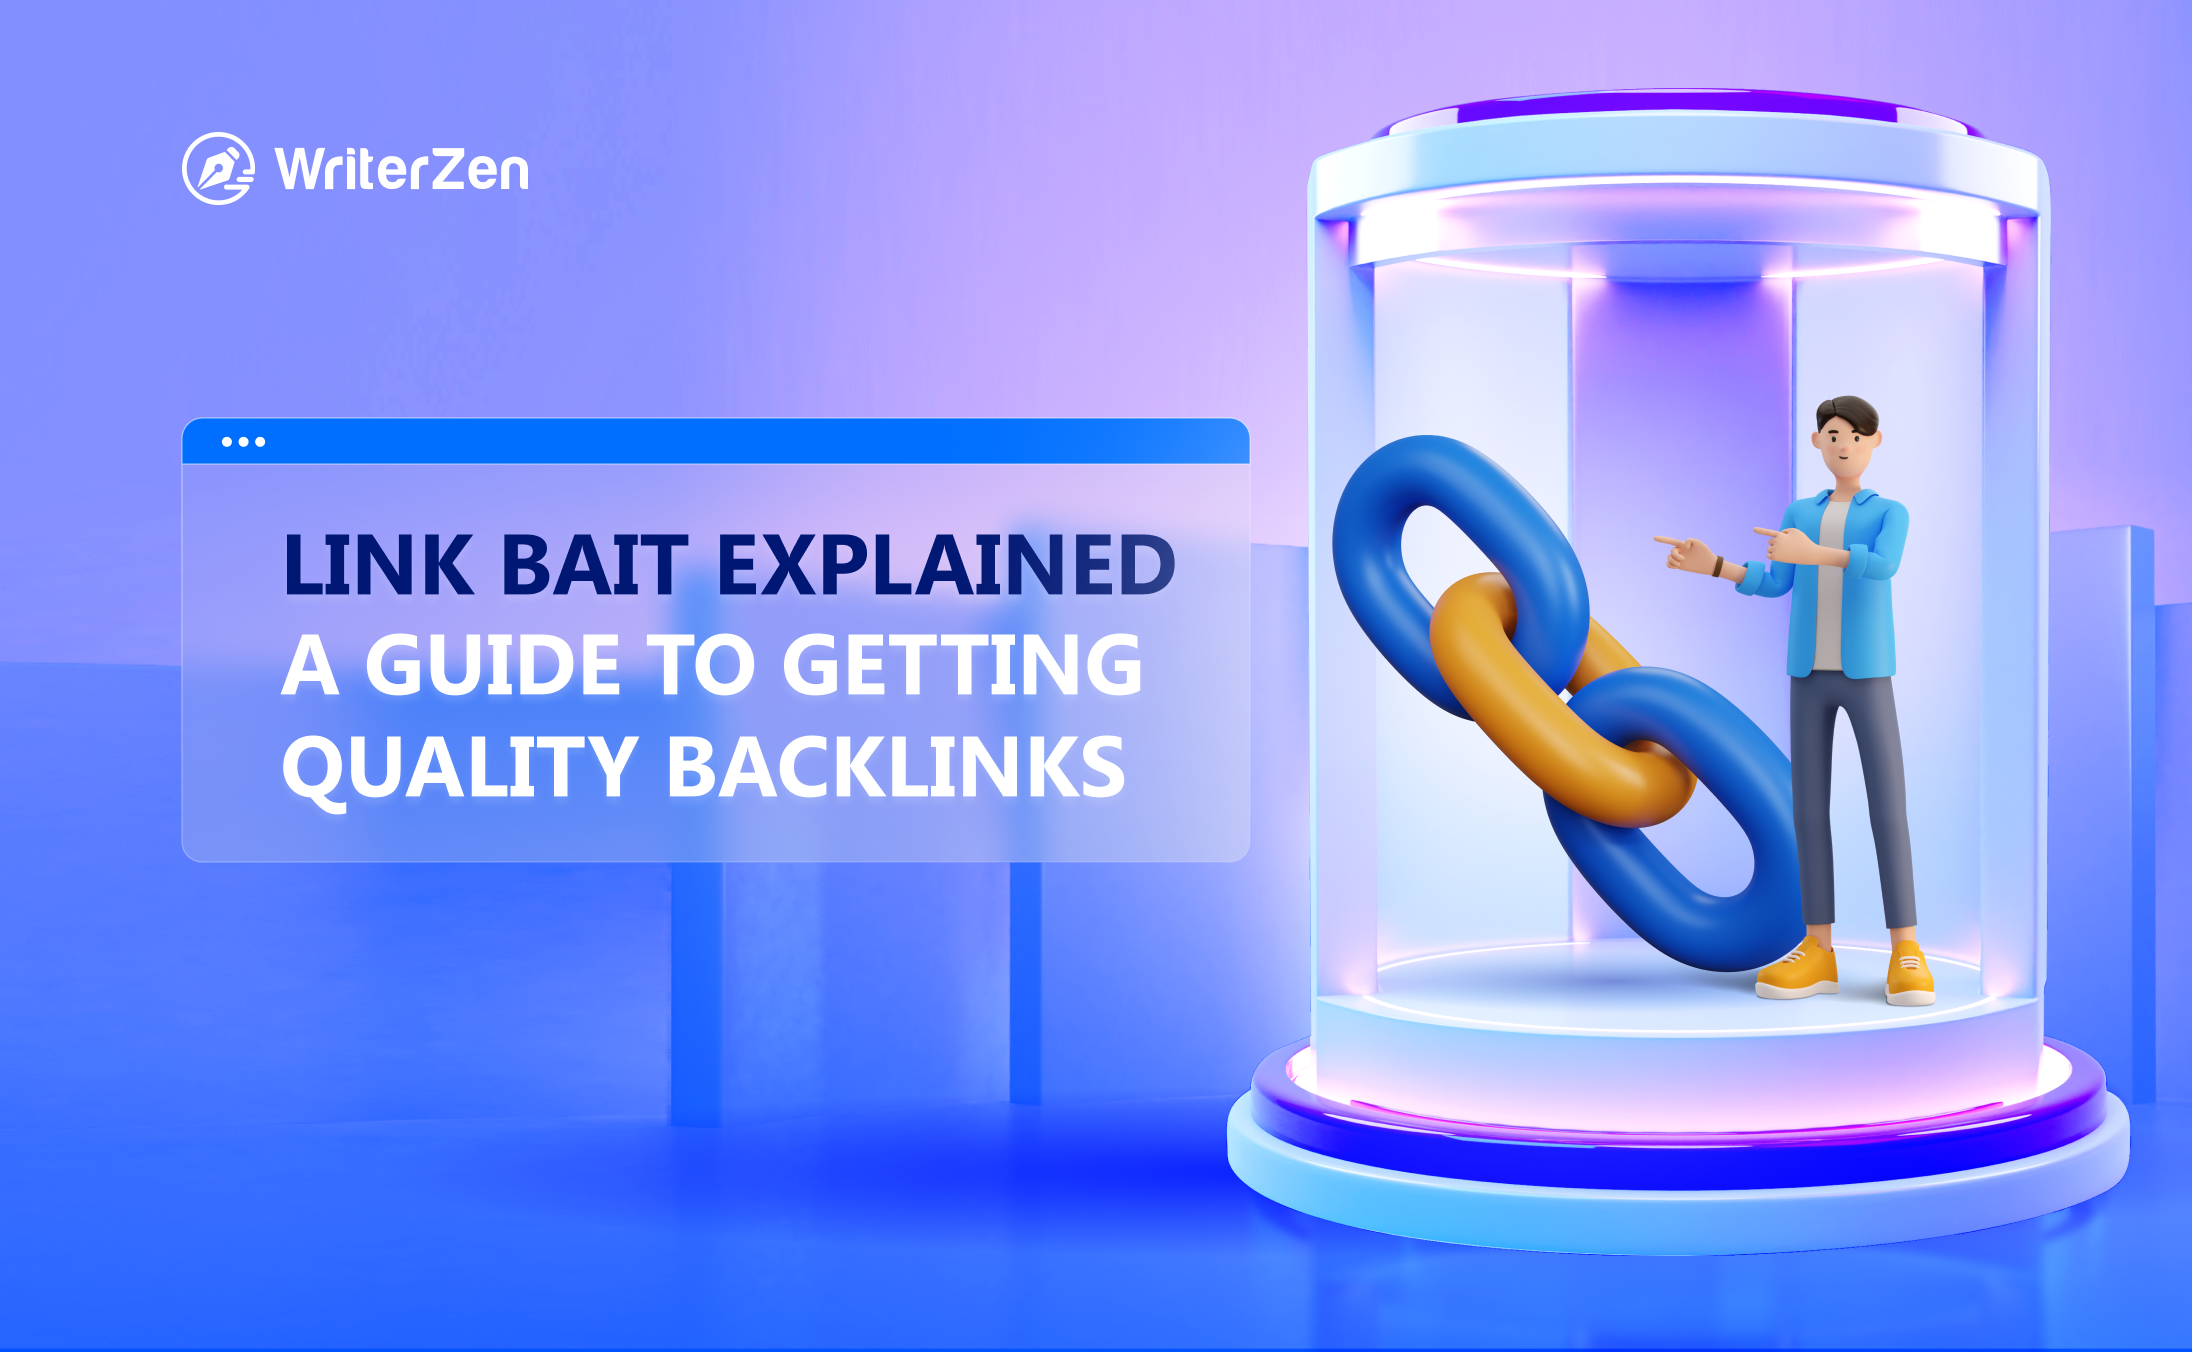 Link Bait Explained - A Guide To Getting Quality Backlinks